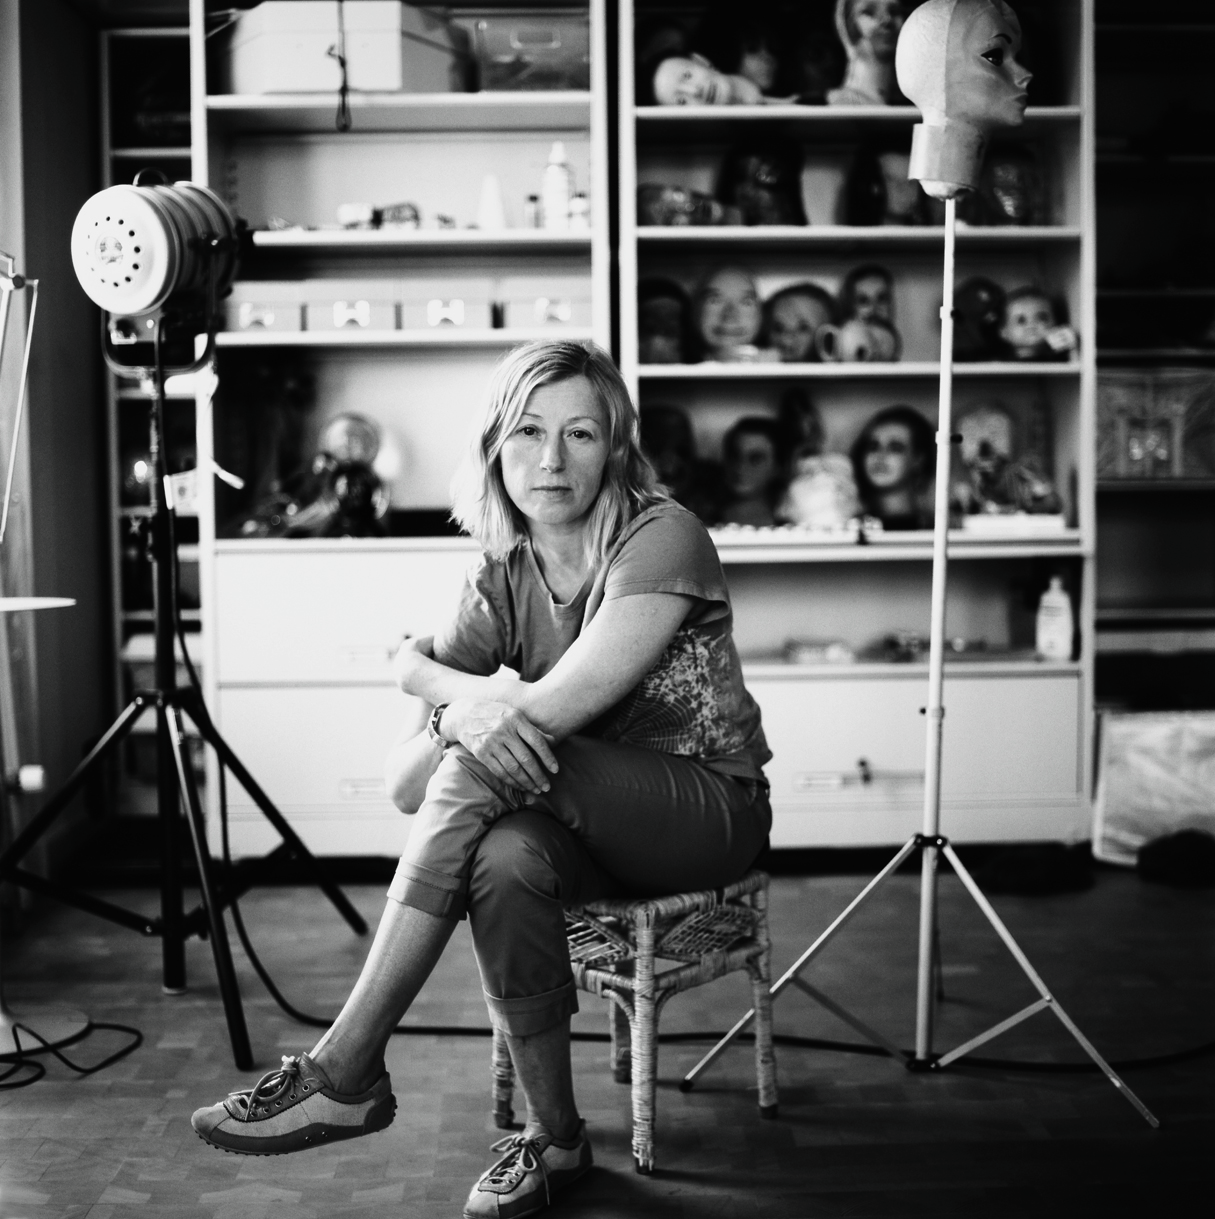 Cindy Sherman in her studio New York 2007. As reproduced in our Phaidon Focus book